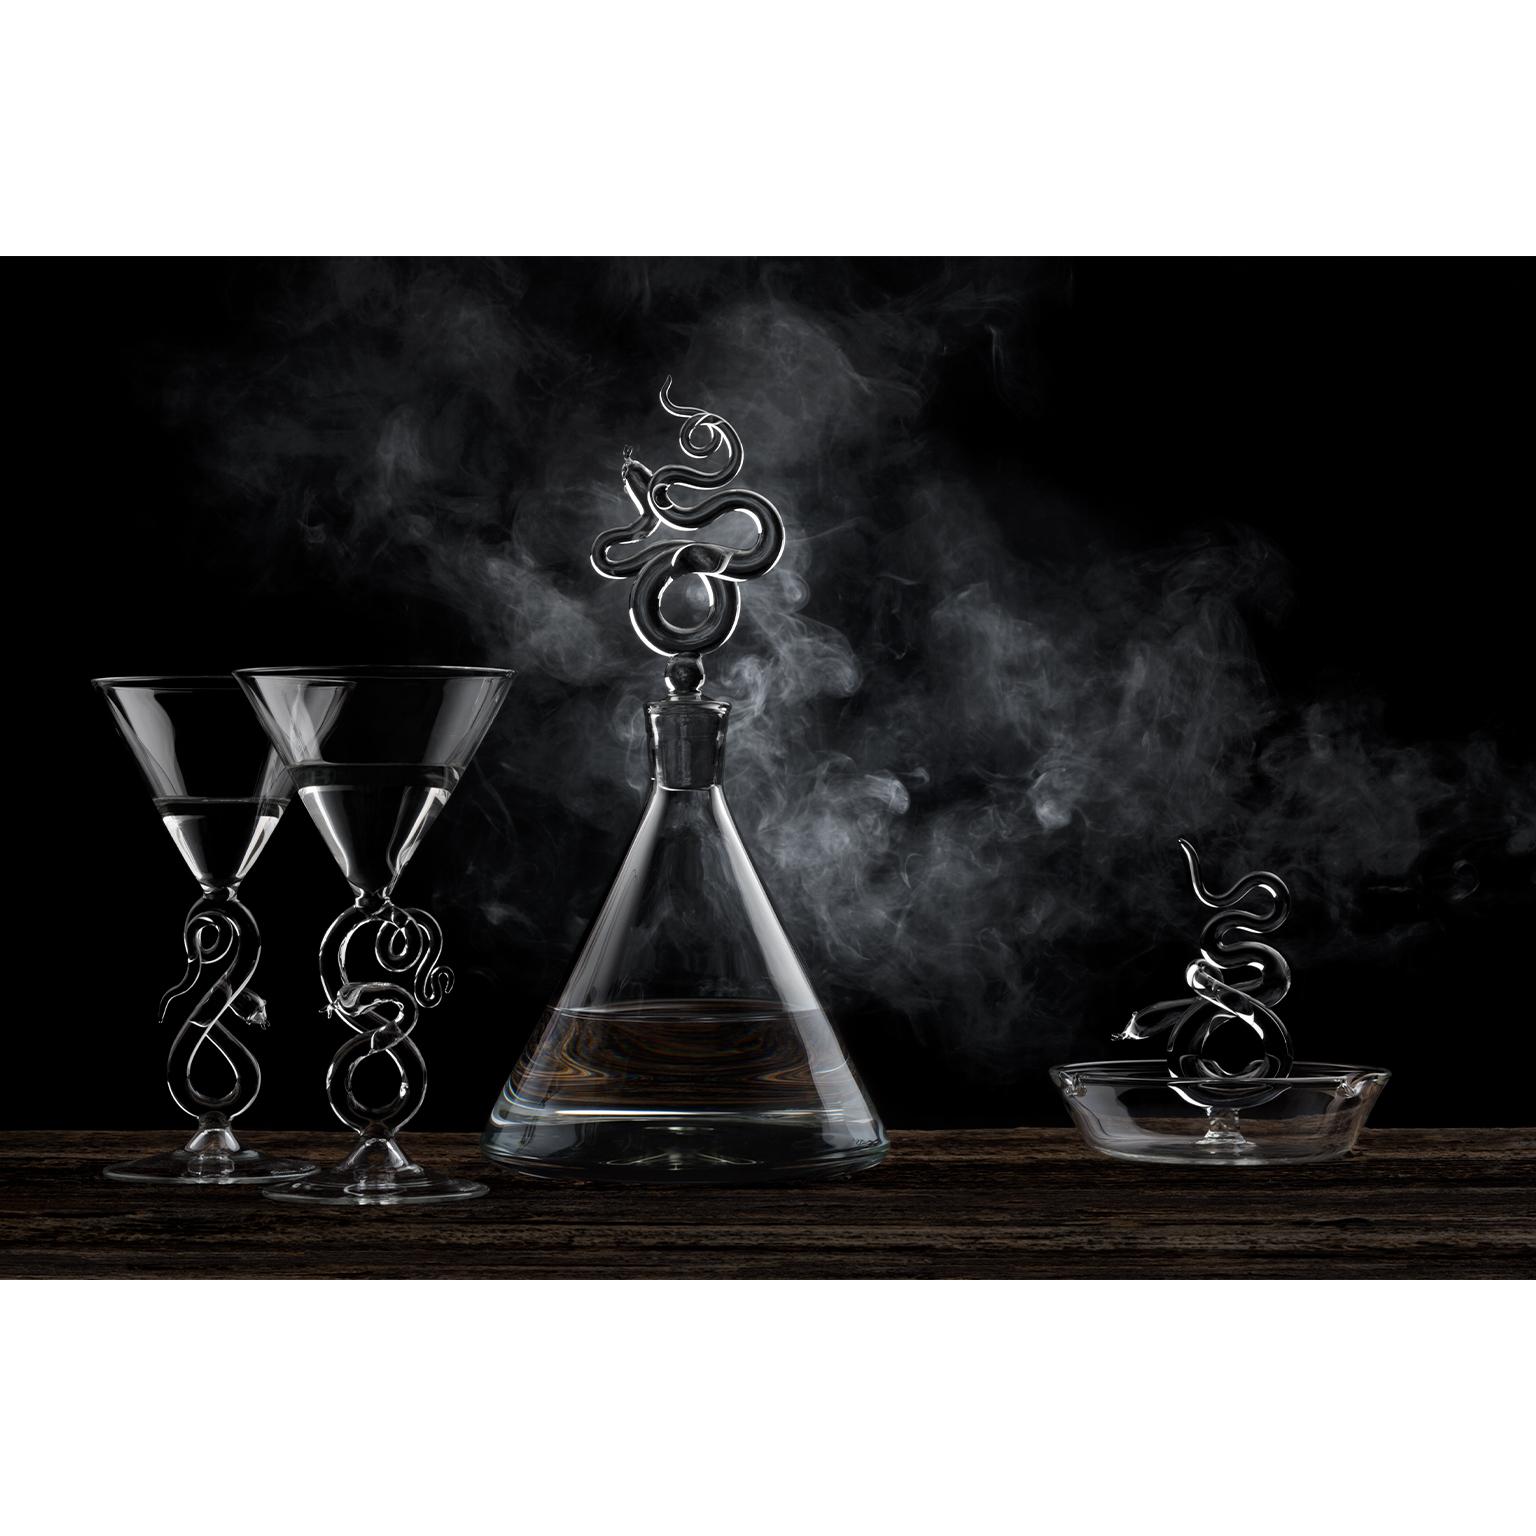 'Contemporary Serpentine Hand Blown Glass Liquor Decanter, Glasses and Astray Set